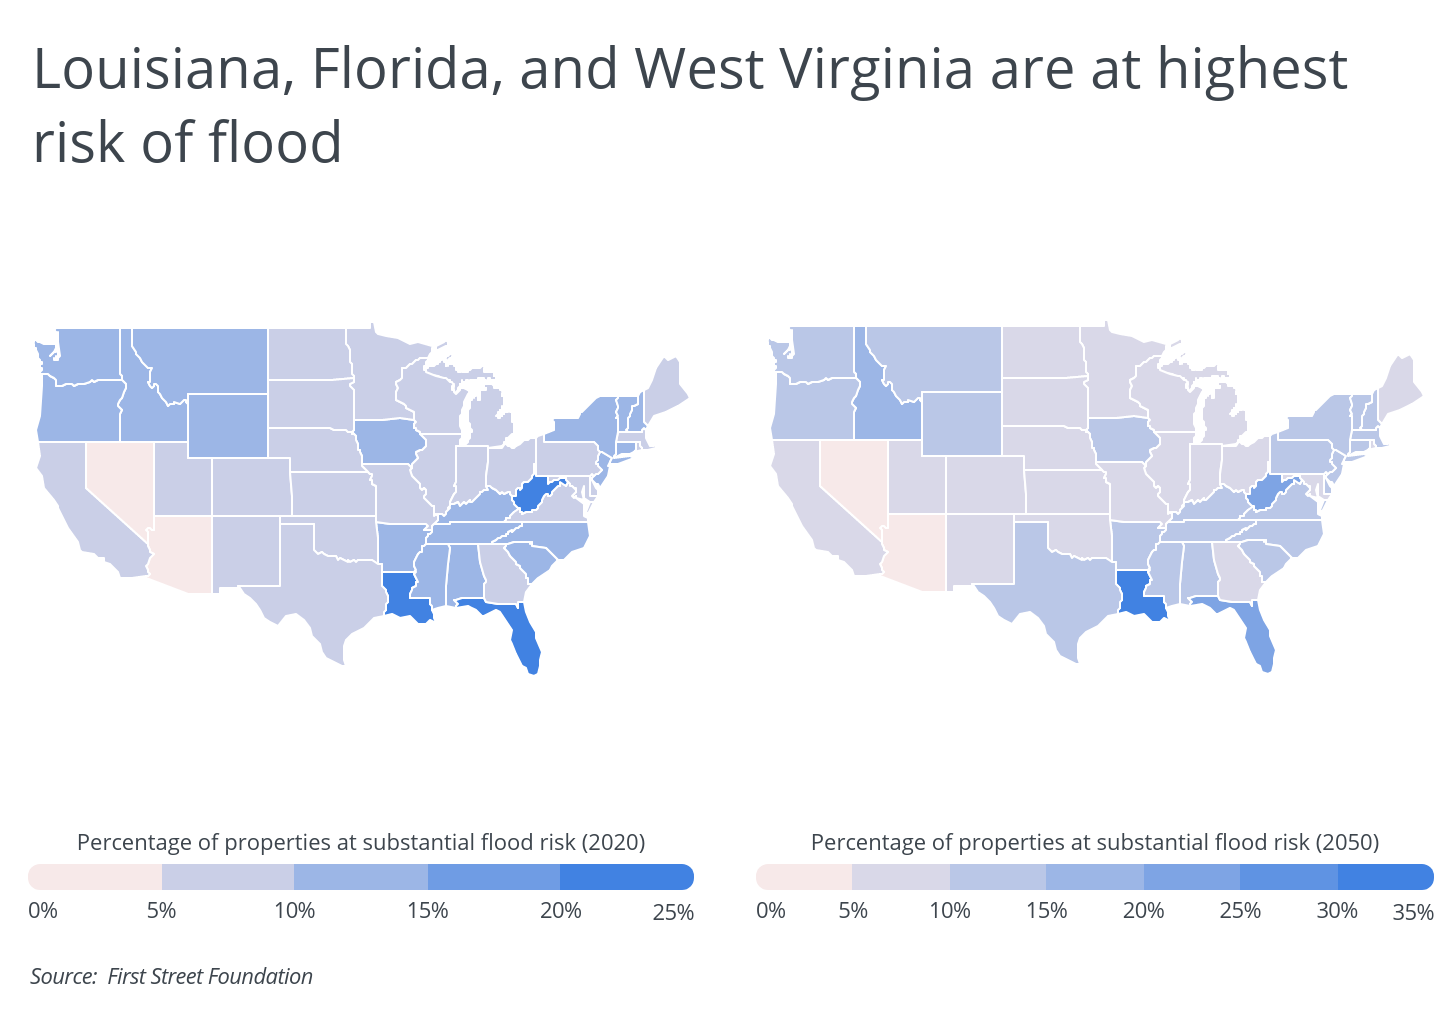 Louisiana, Florida and West Virginia are at highest risk of flood